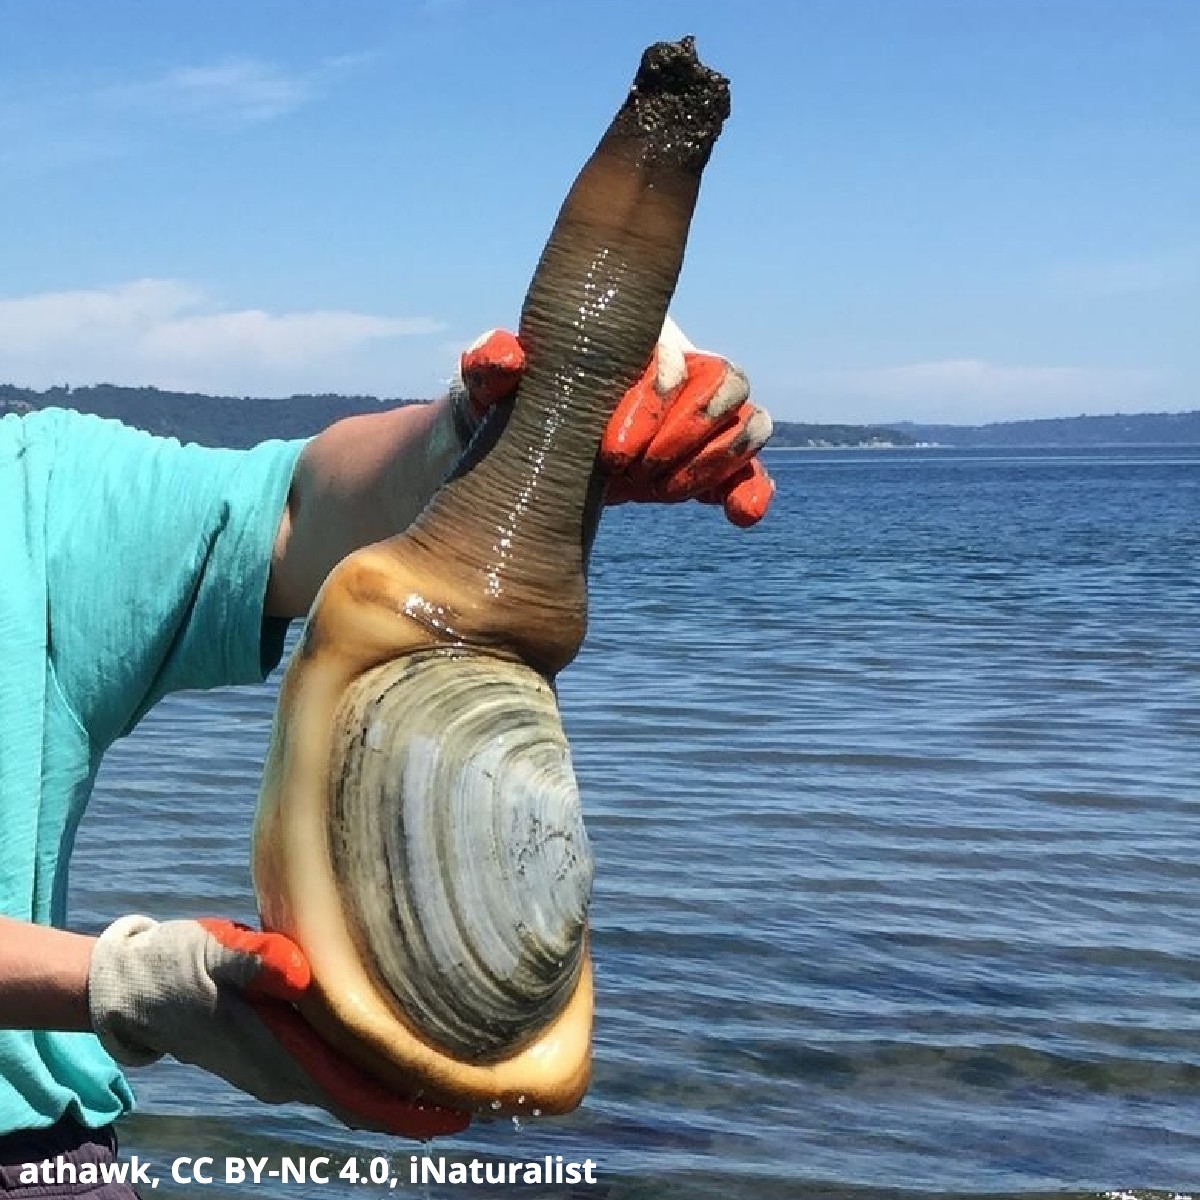 American Museum Of Natural History On Twitter Have You Ever Seen The Pacific Geoduck Also